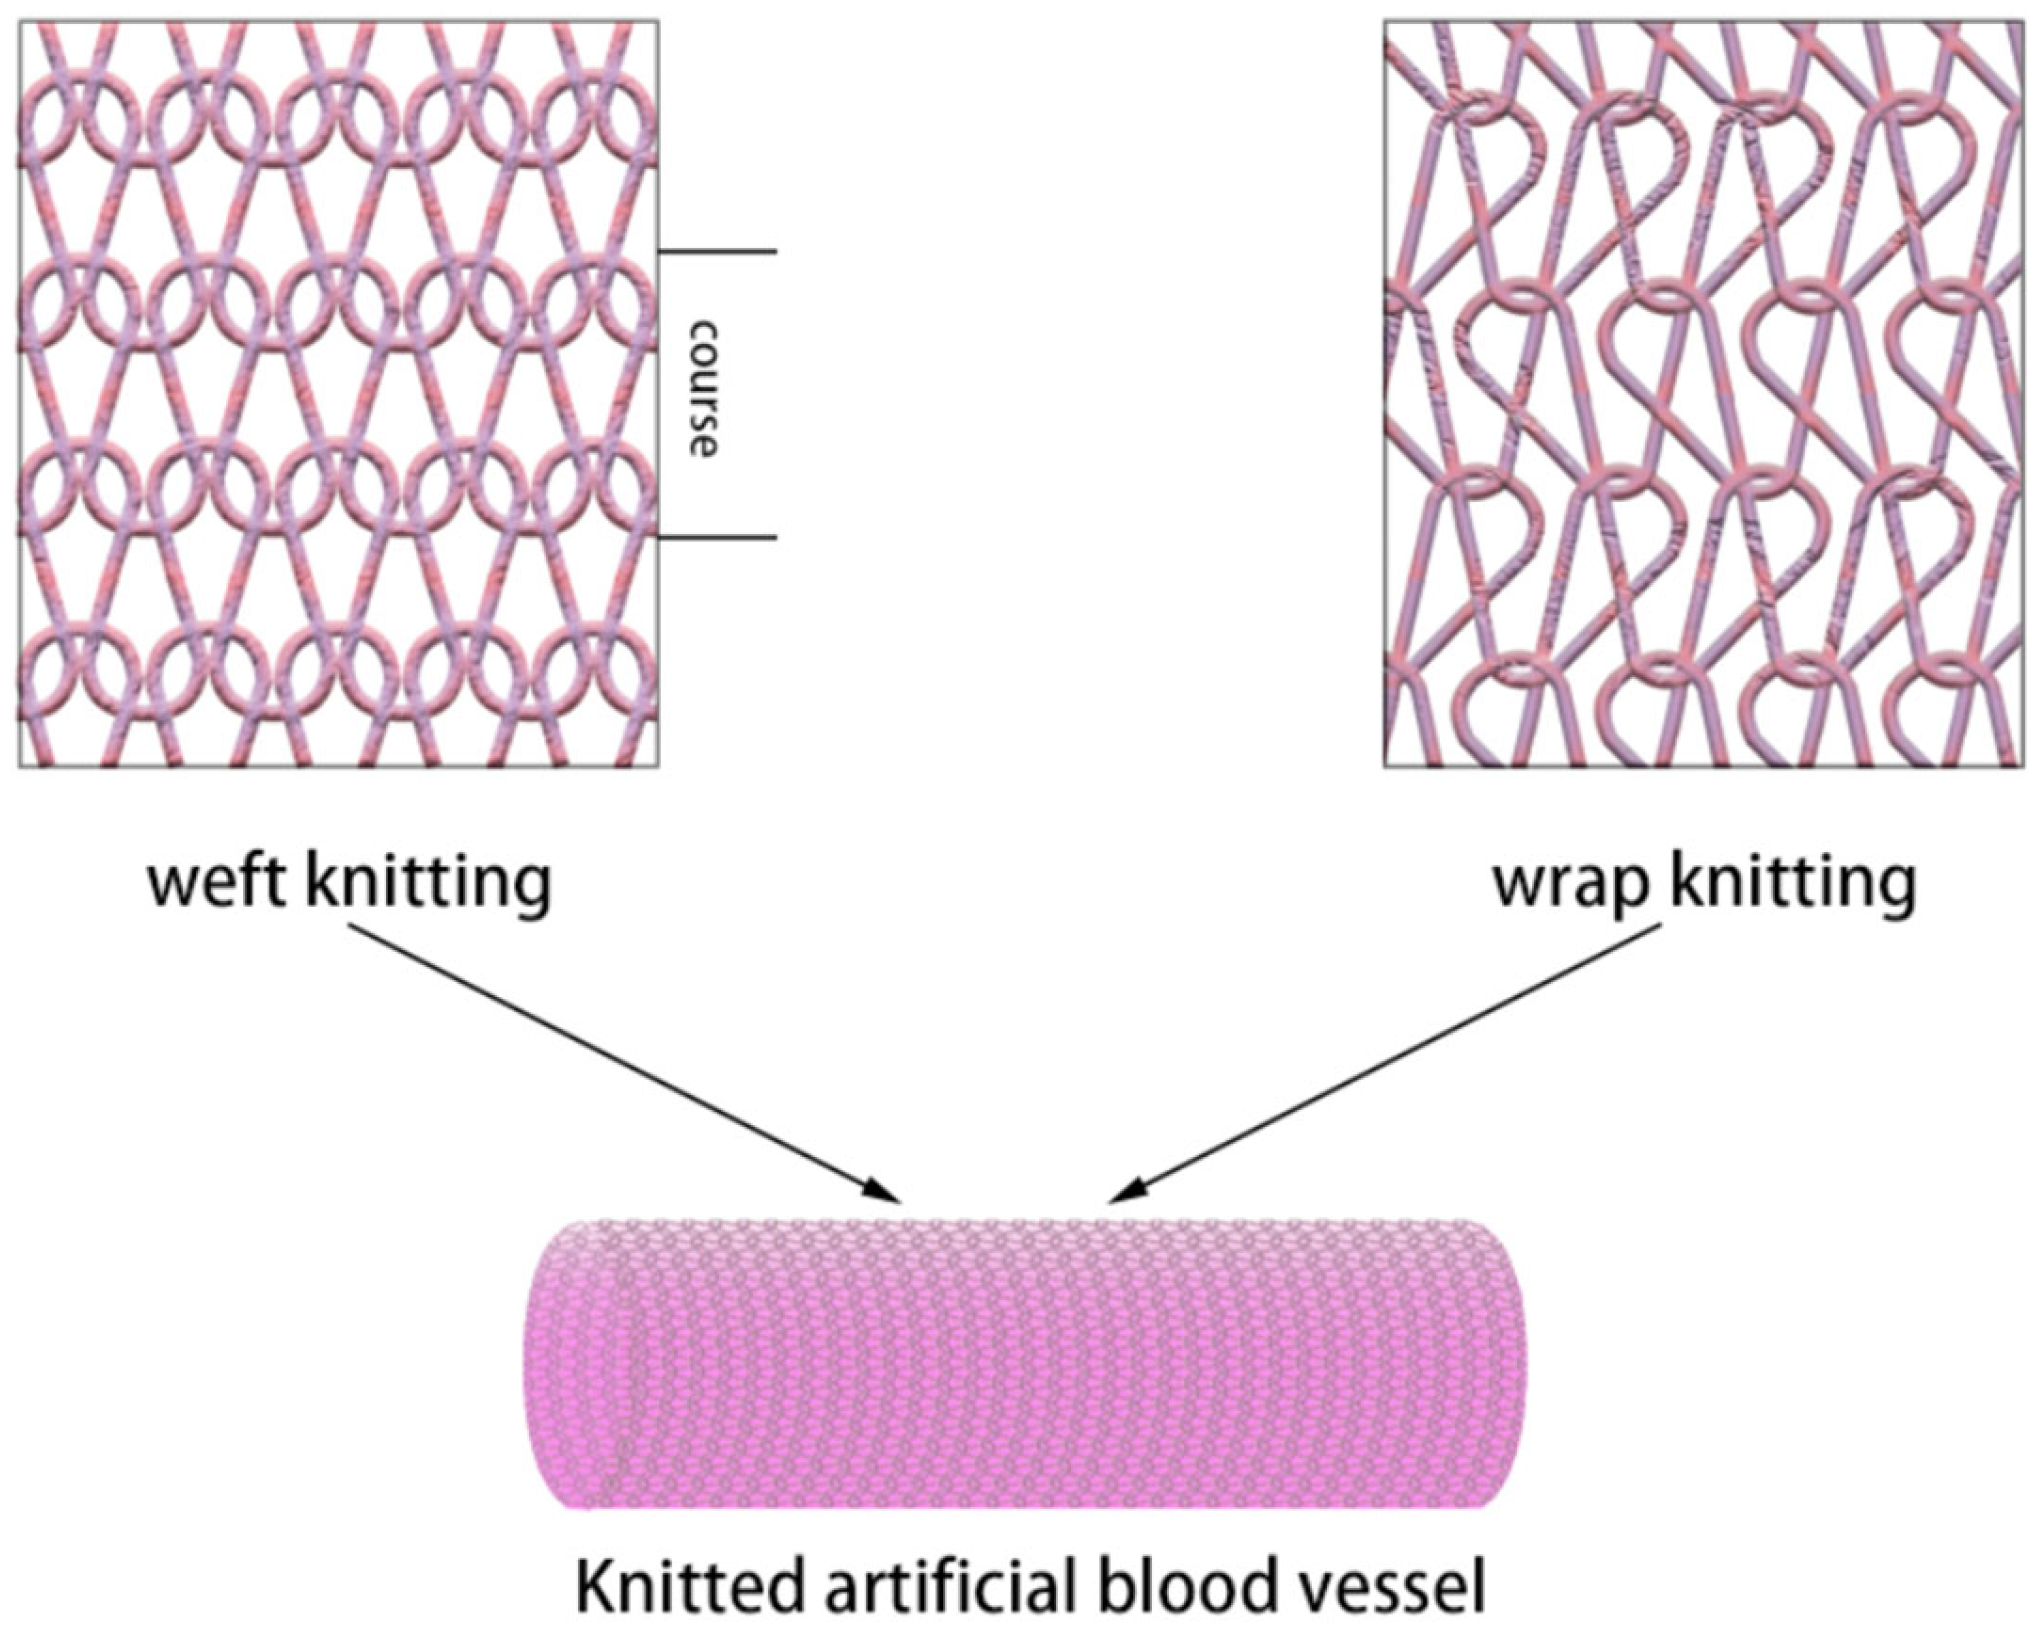 Structural design patterns of a woven Dacron ® graft.